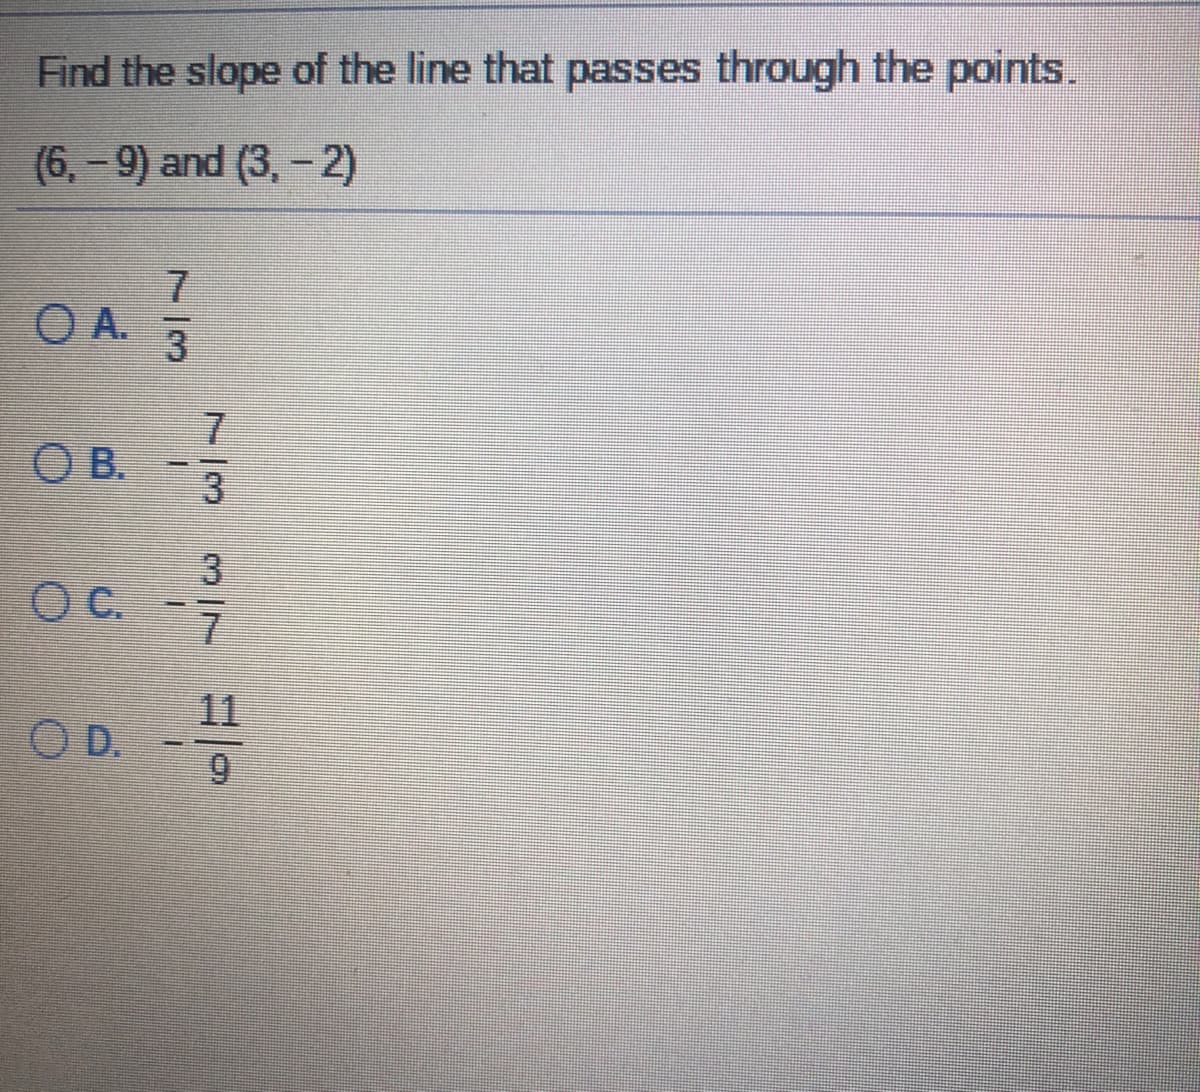 Find the slope of the line that passes through the points.
(6, - 9) and (3, - 2)
O A.
O B.
C.
11
O D.
7/3
3/7
7/3
